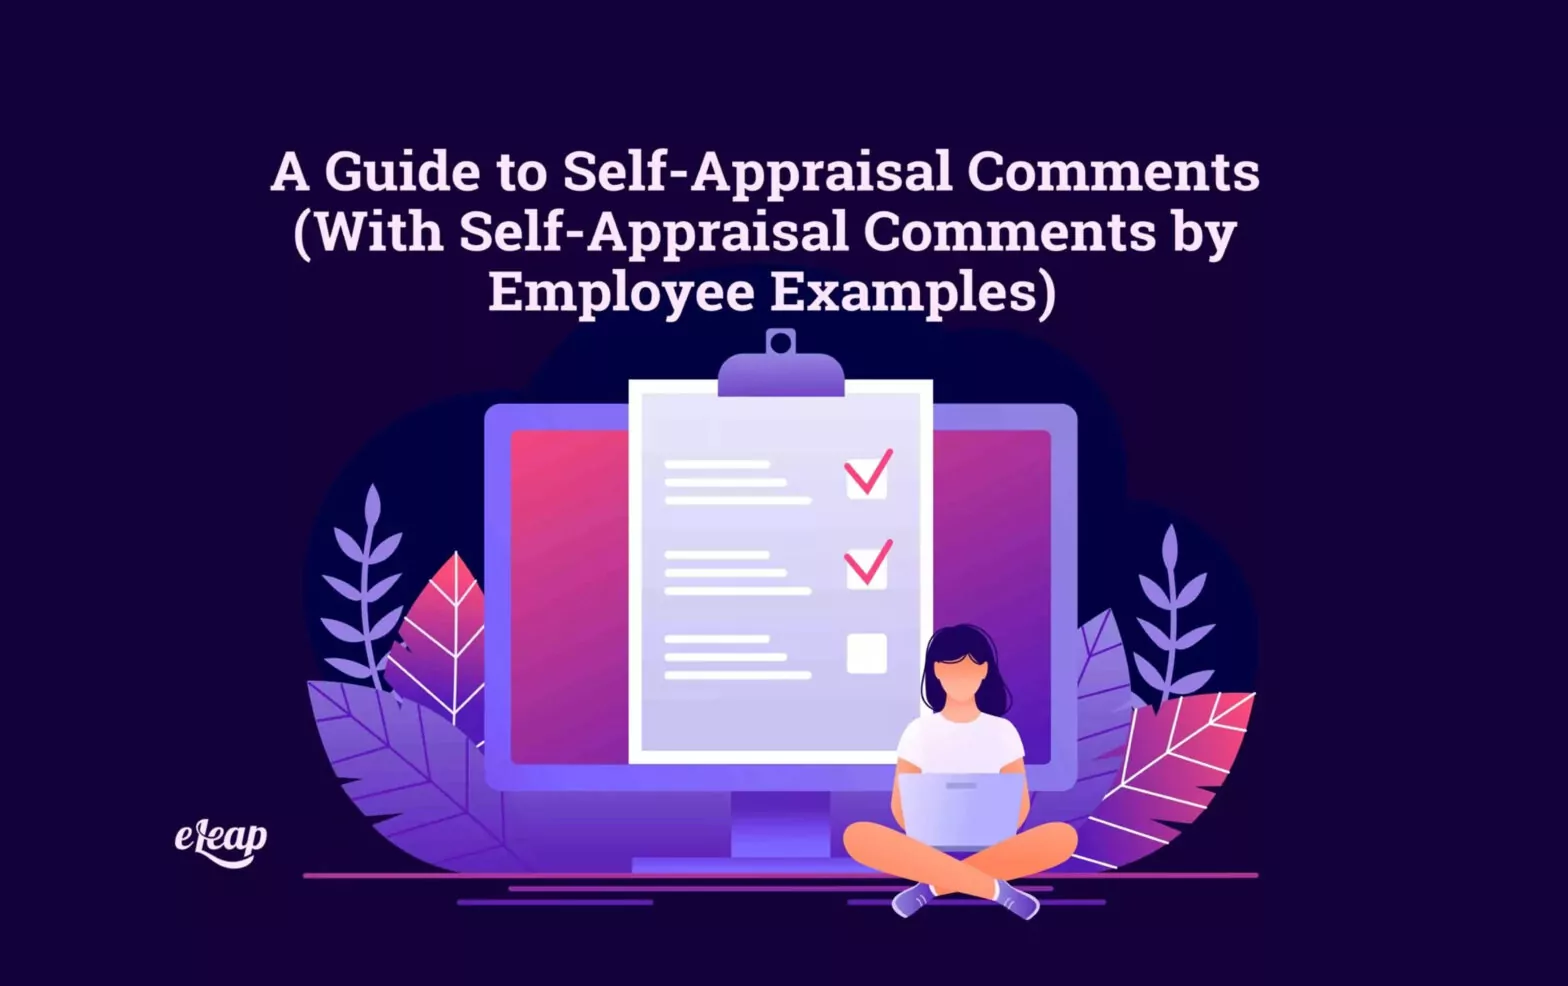 A Guide to Self-Appraisal Comments (With Self-Appraisal Comments by Employee Examples)